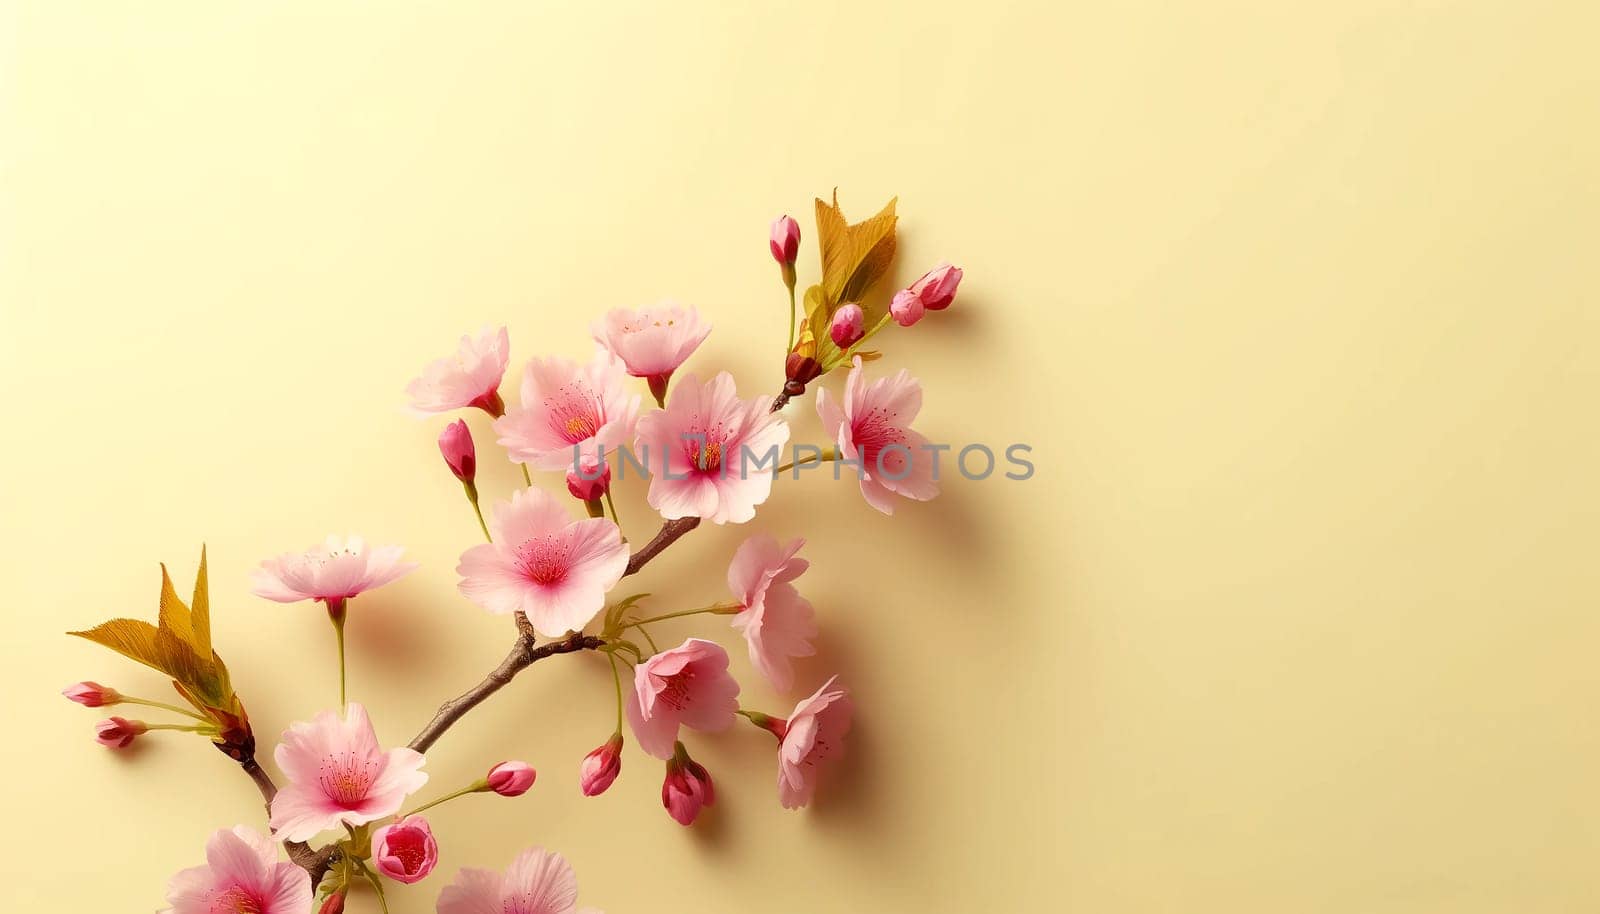 blooming sakura branch on a yellow background, copy space by Annado